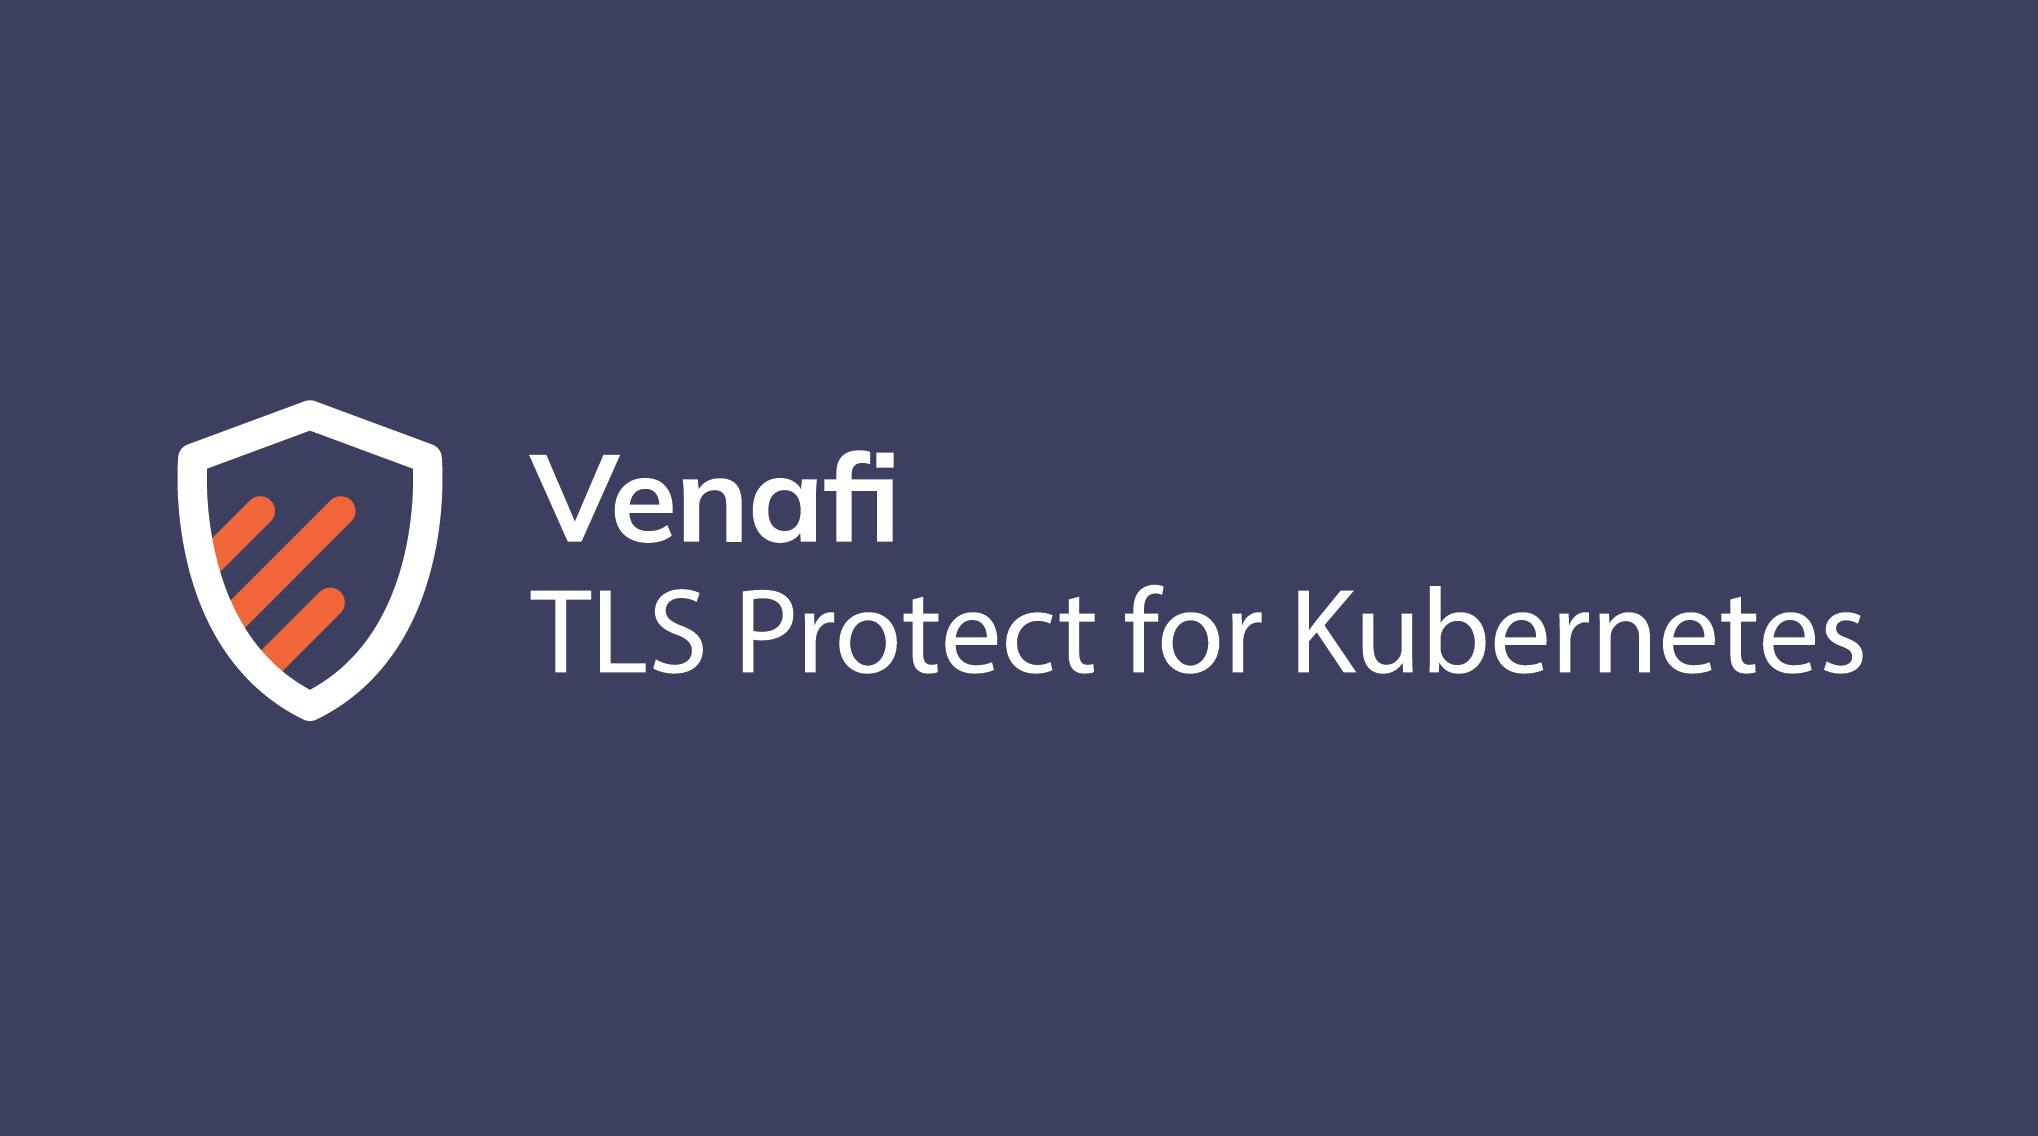 Venafi Adds Kubernetes Support to Certificate Management Platform - cover graphic